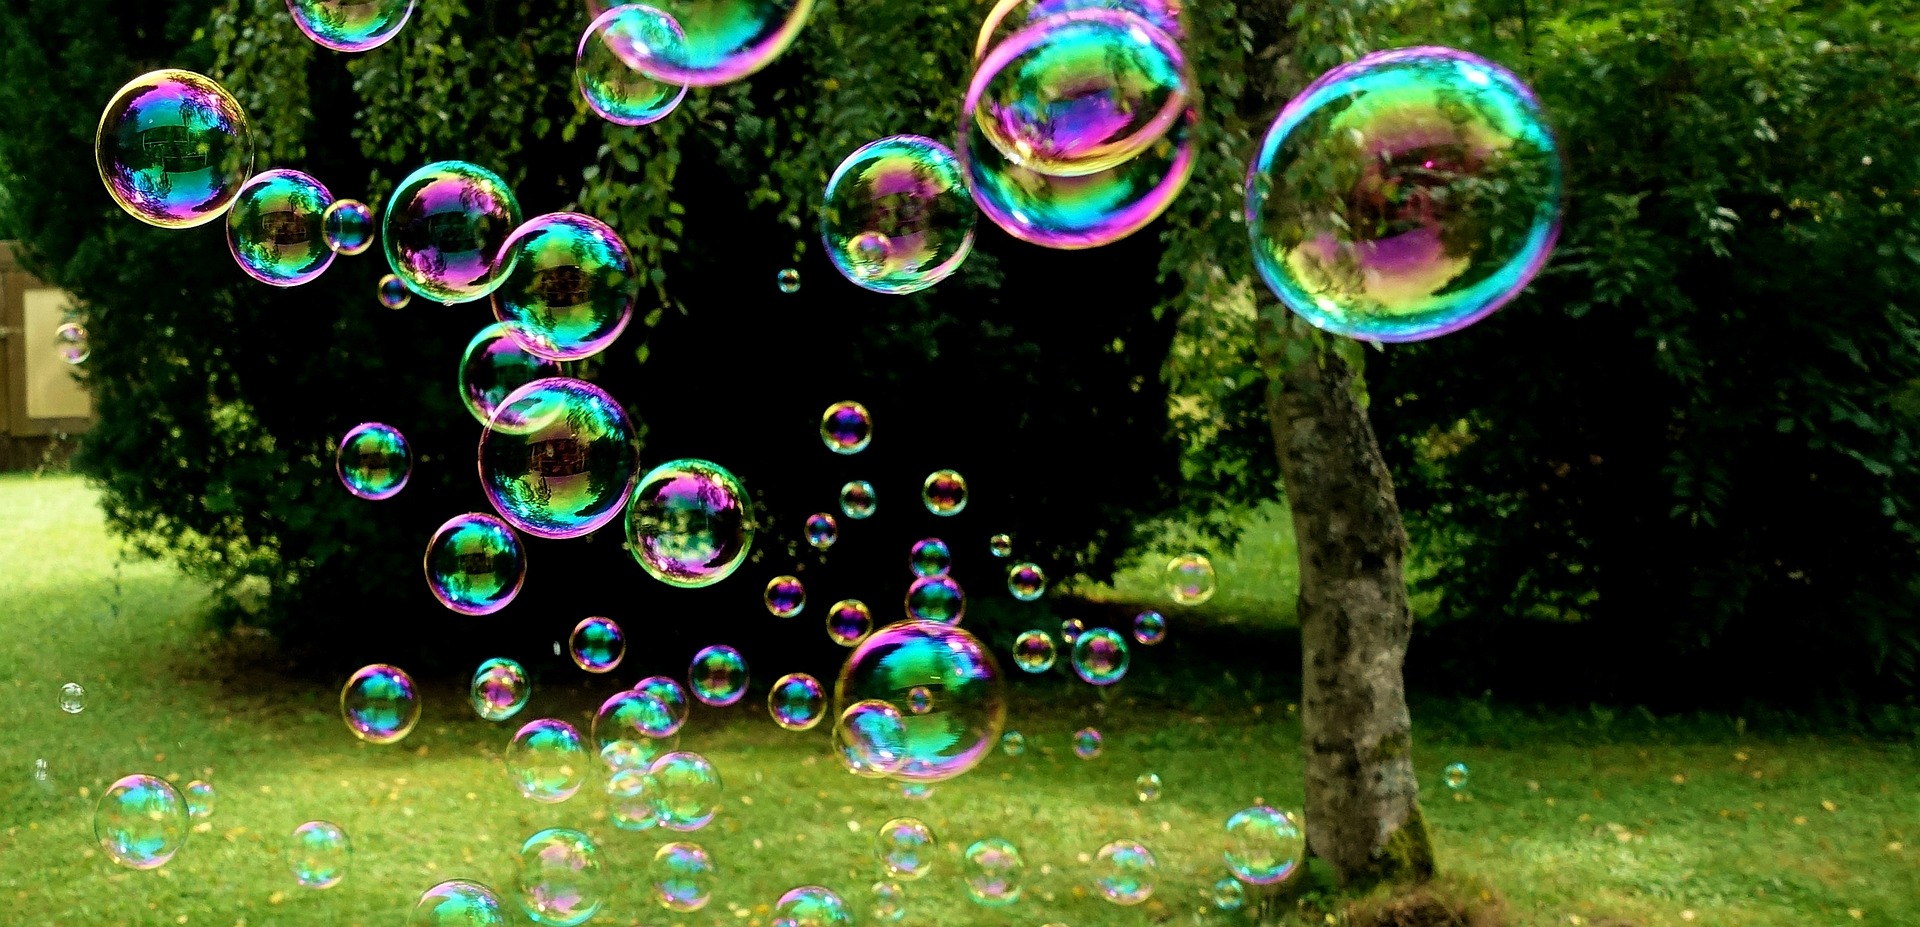 bubbles floating in the air against a green nature background